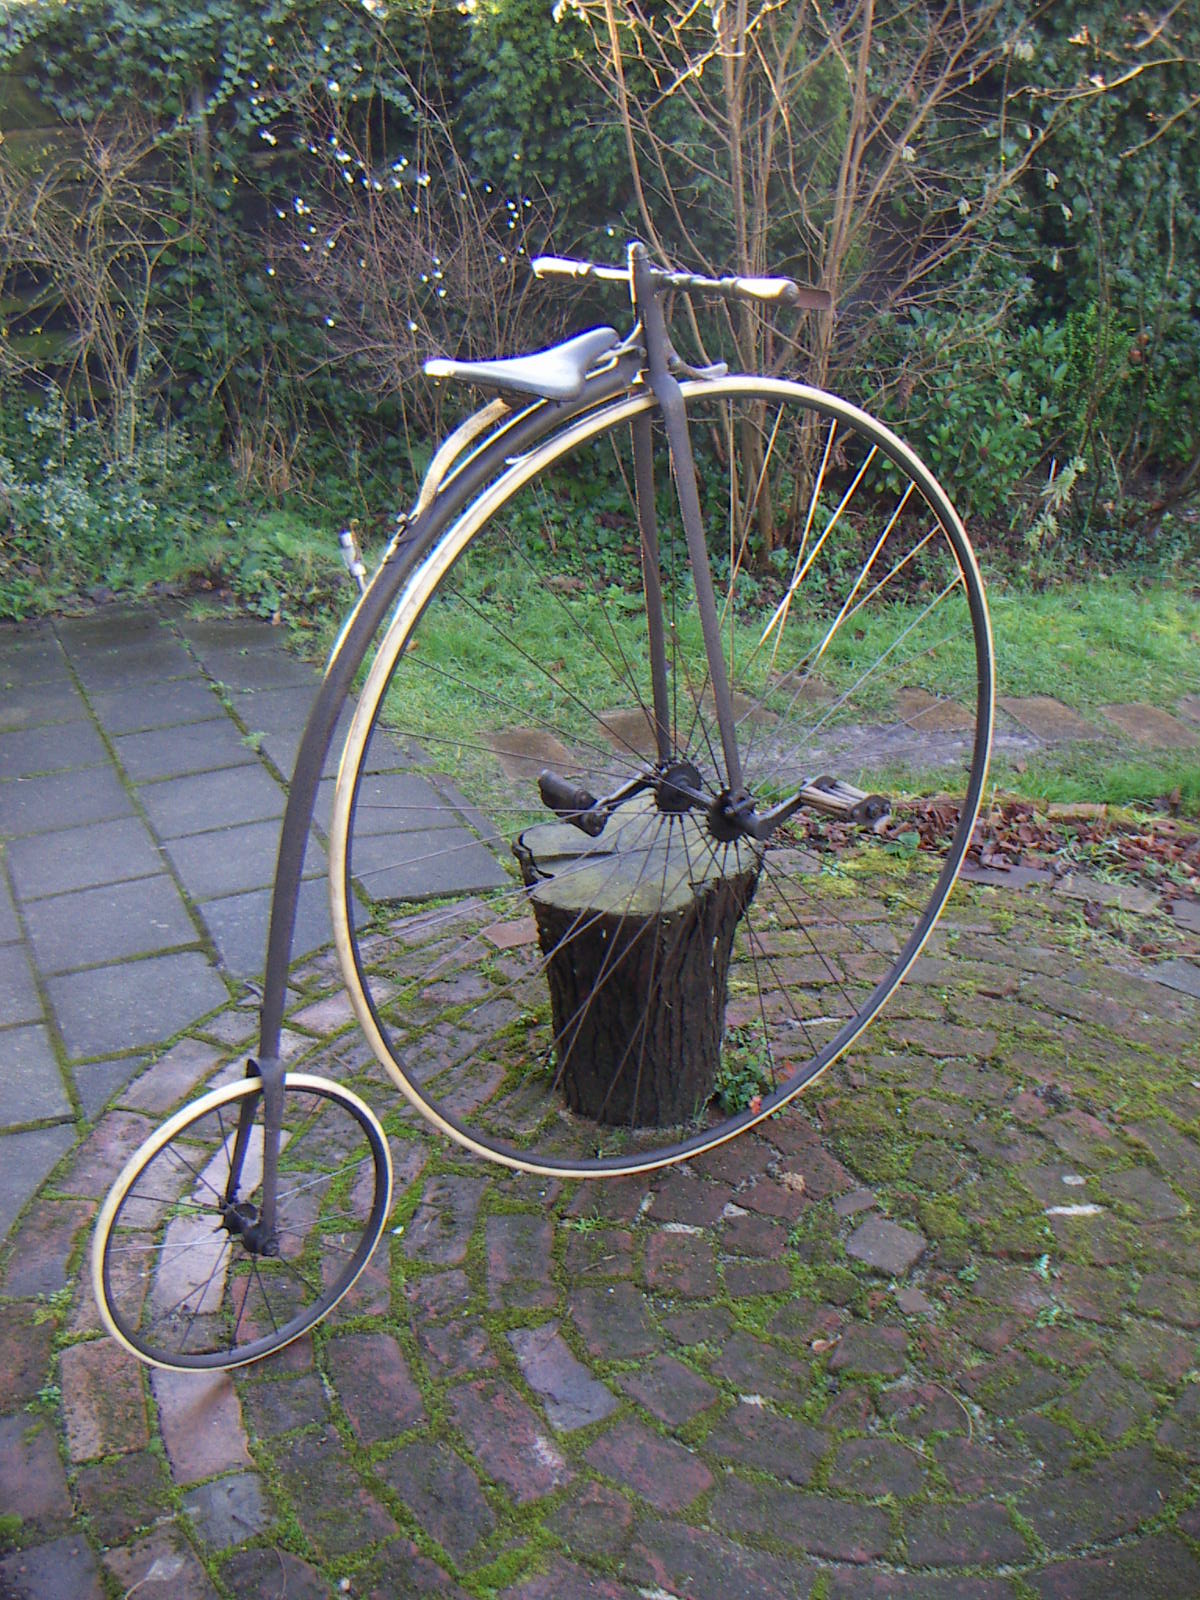 Singer 44 inch Youths` bicycle